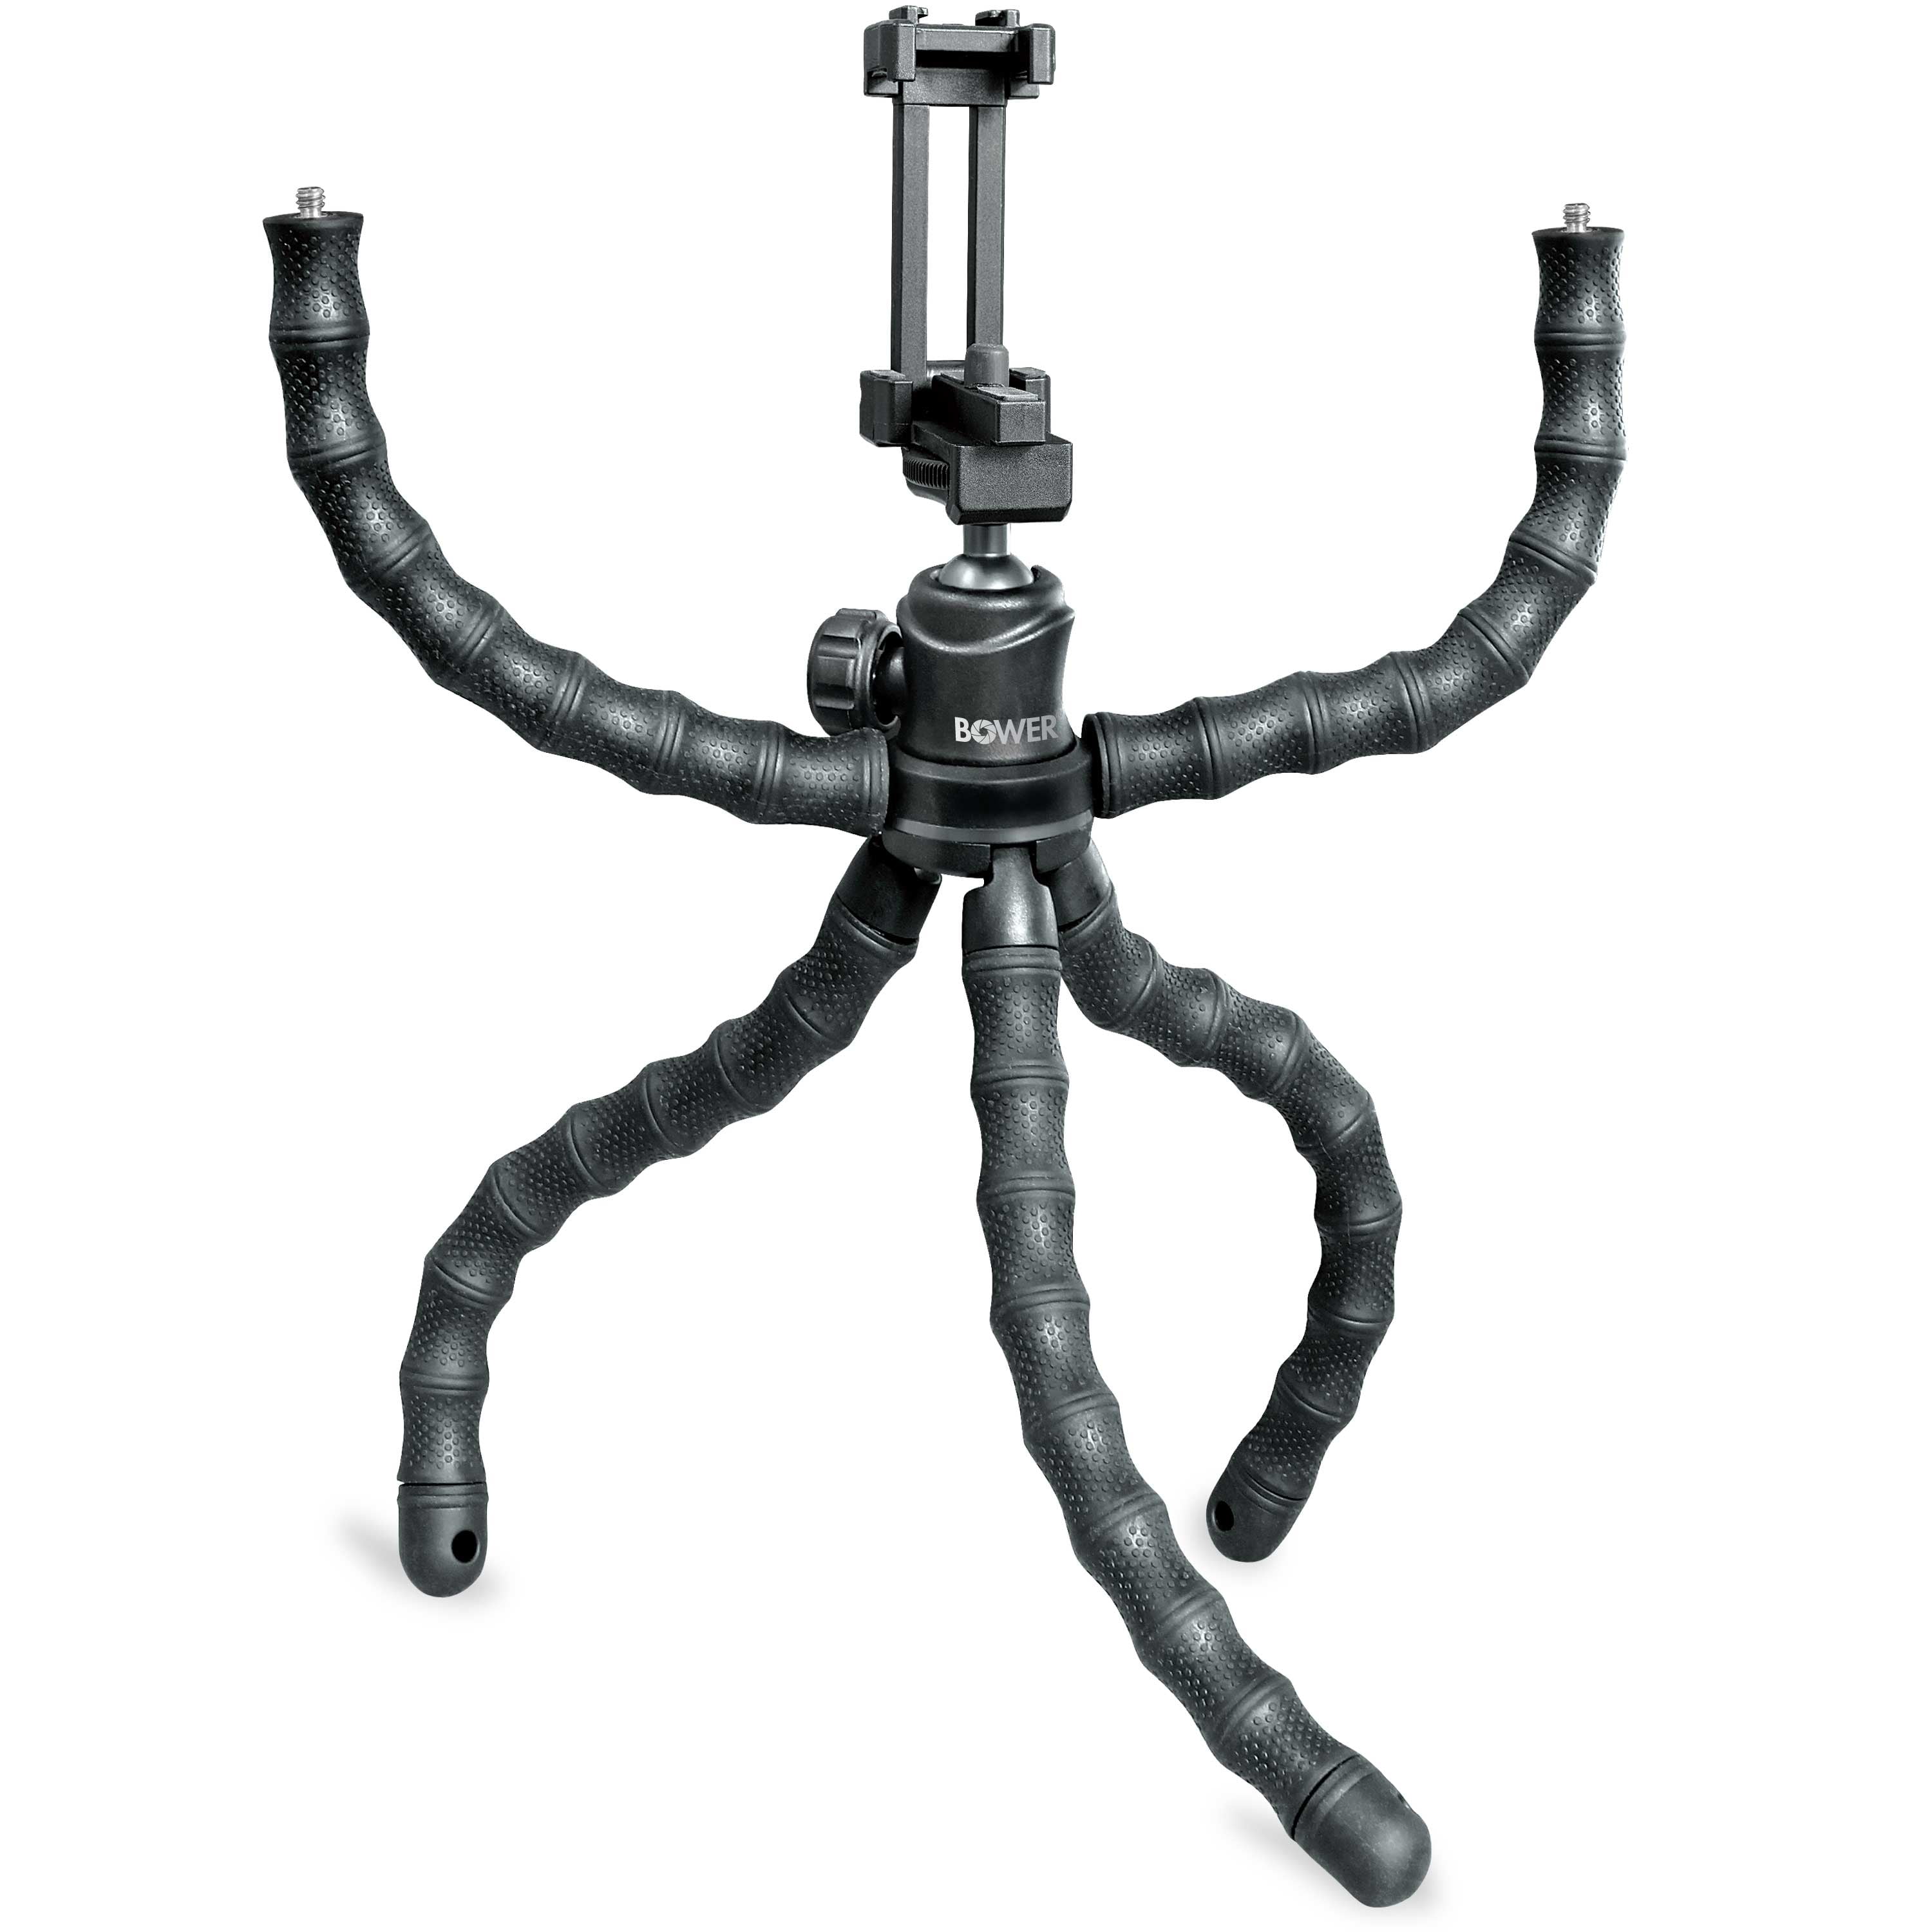 Bower 14- inch Grappling Vlogging Flexible Tripod with Ball Head for Content Creation; Black